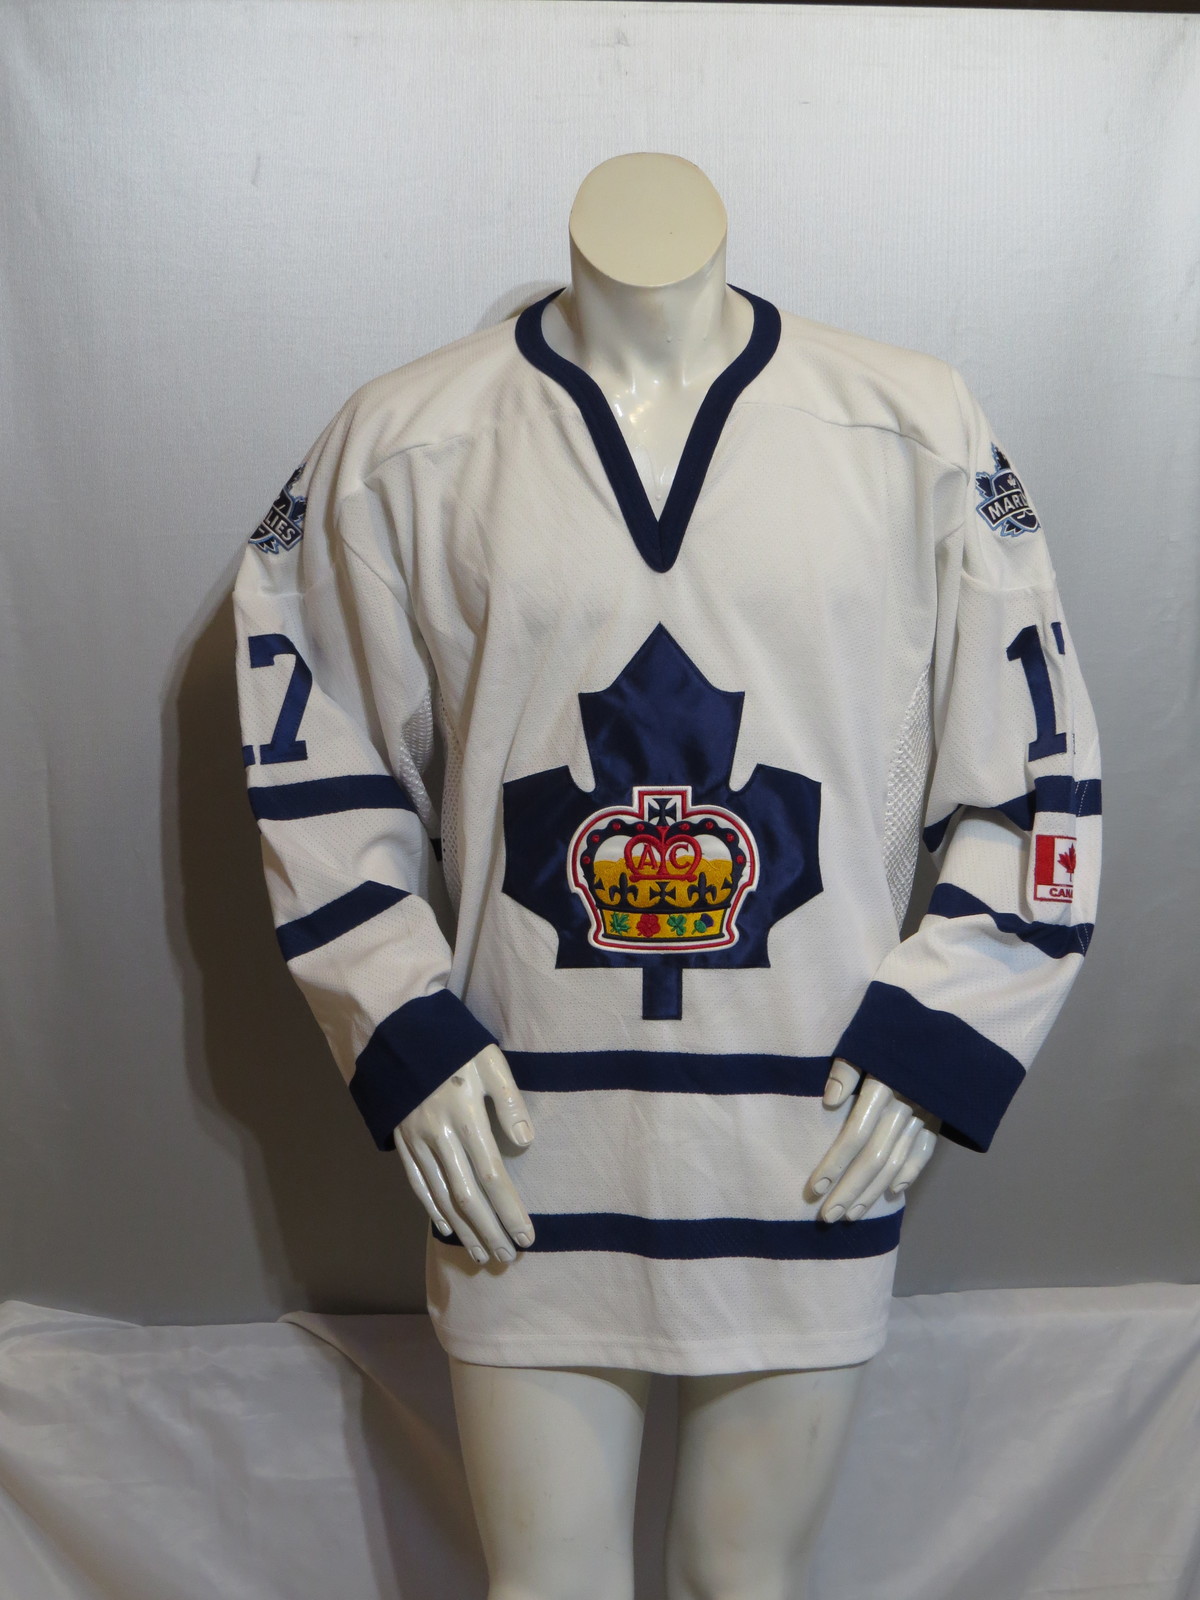 Toronto Marlies Jersey - Home White by and 50 similar items